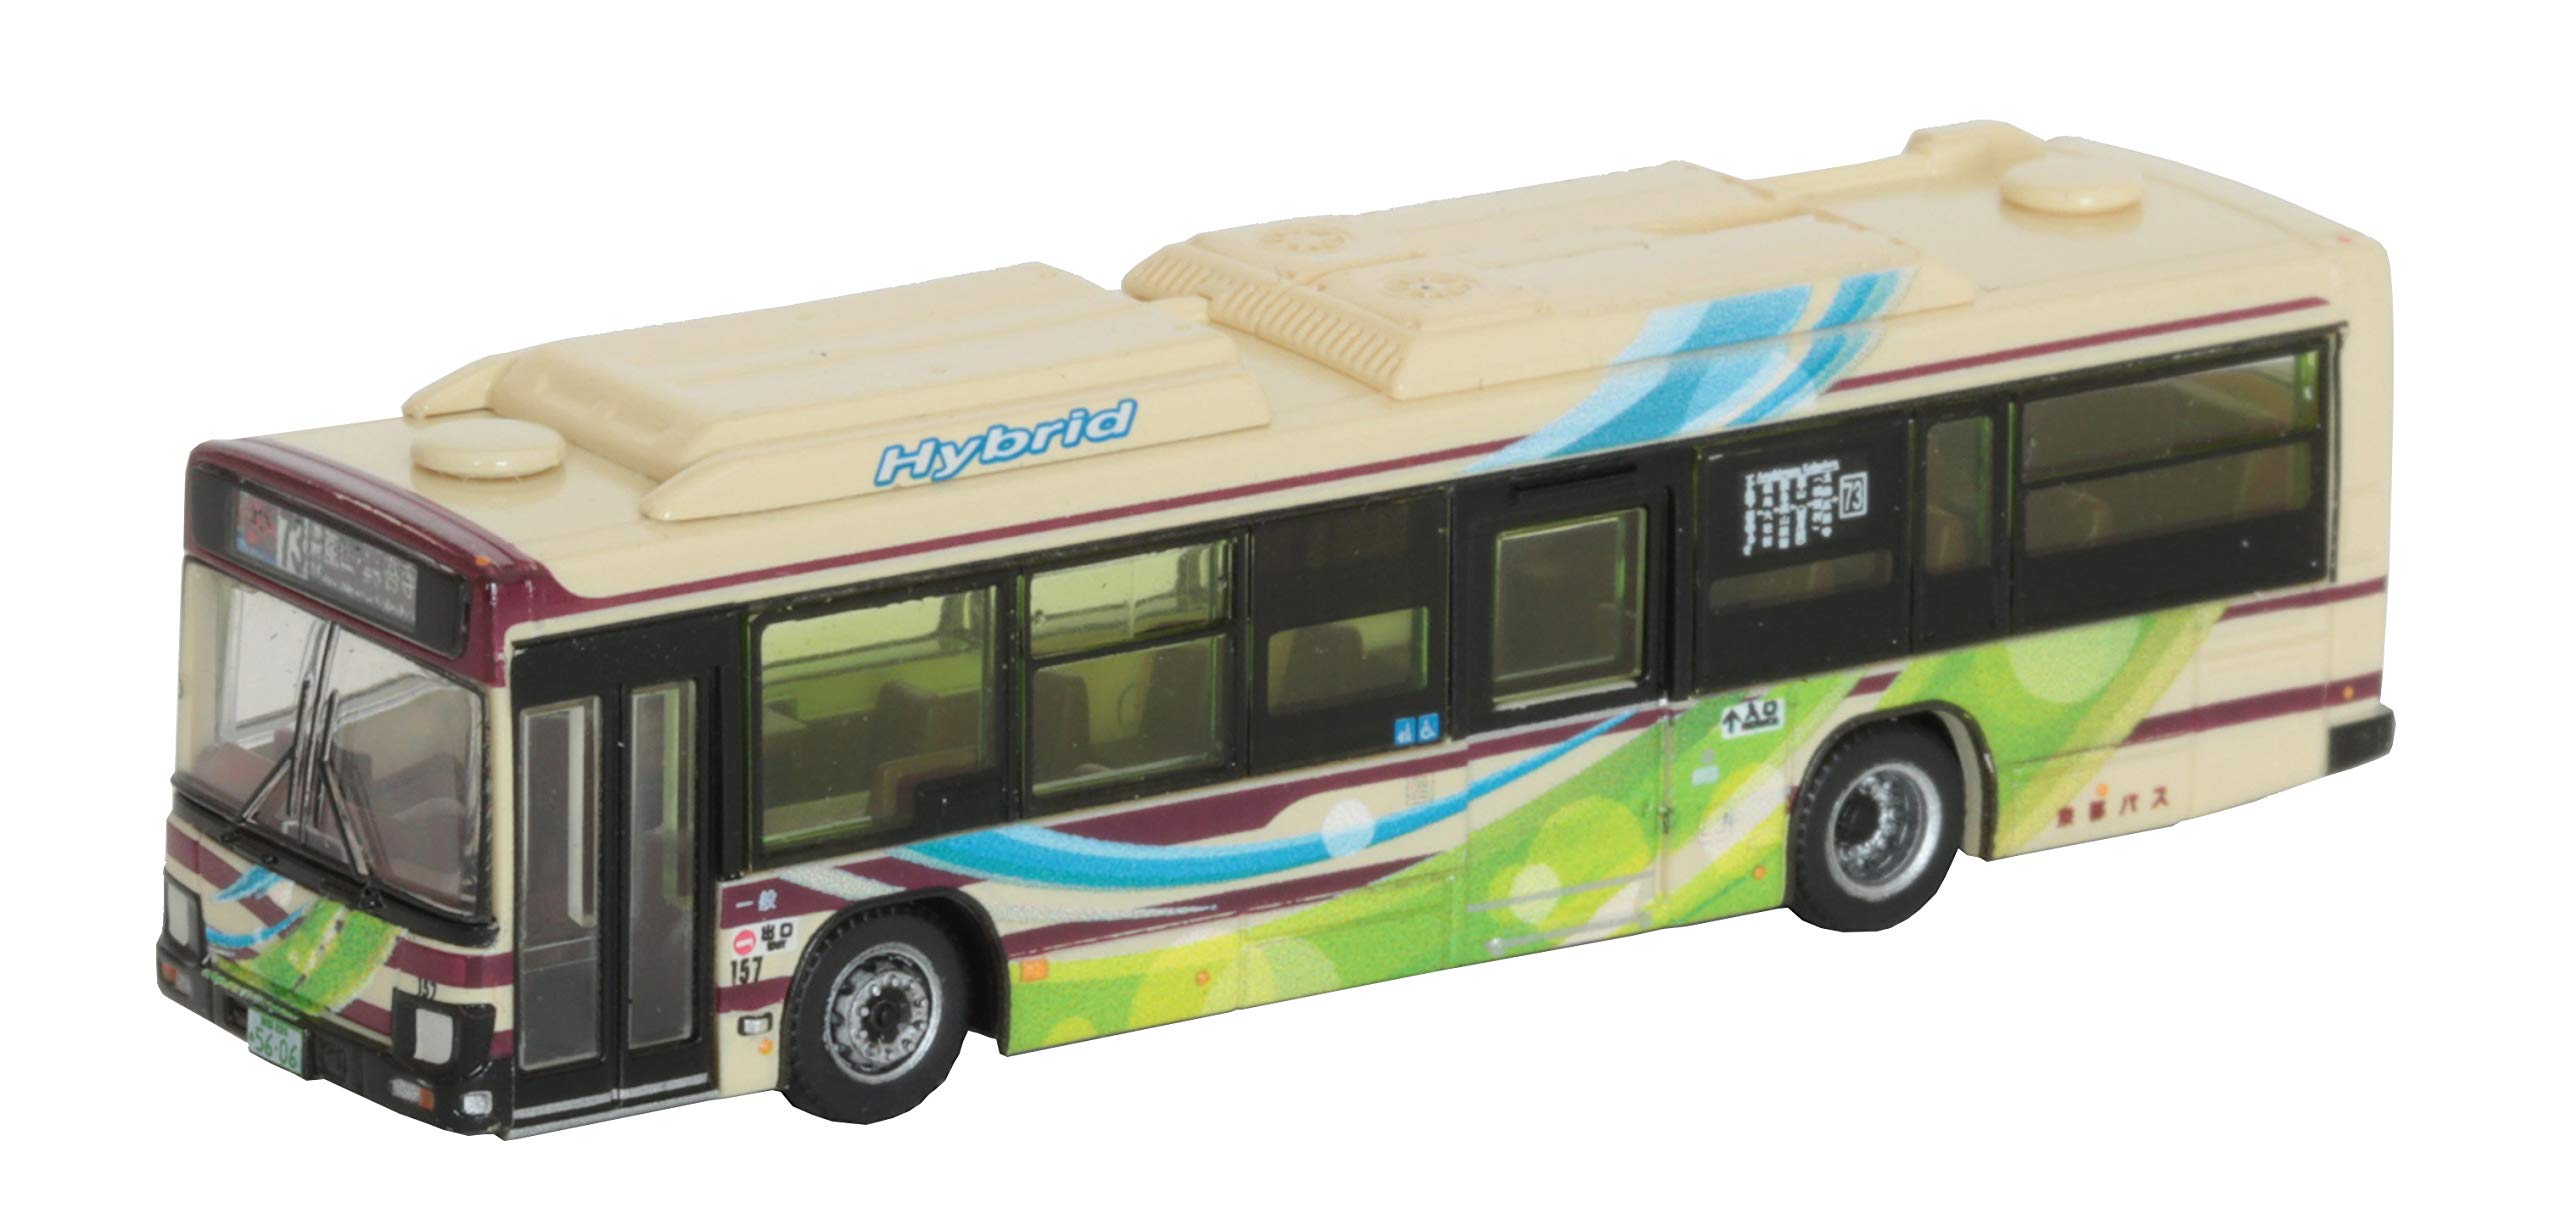 Tomytec National Bus Collection Jb076 - Kyoto Bus Diorama Limited First Order Production